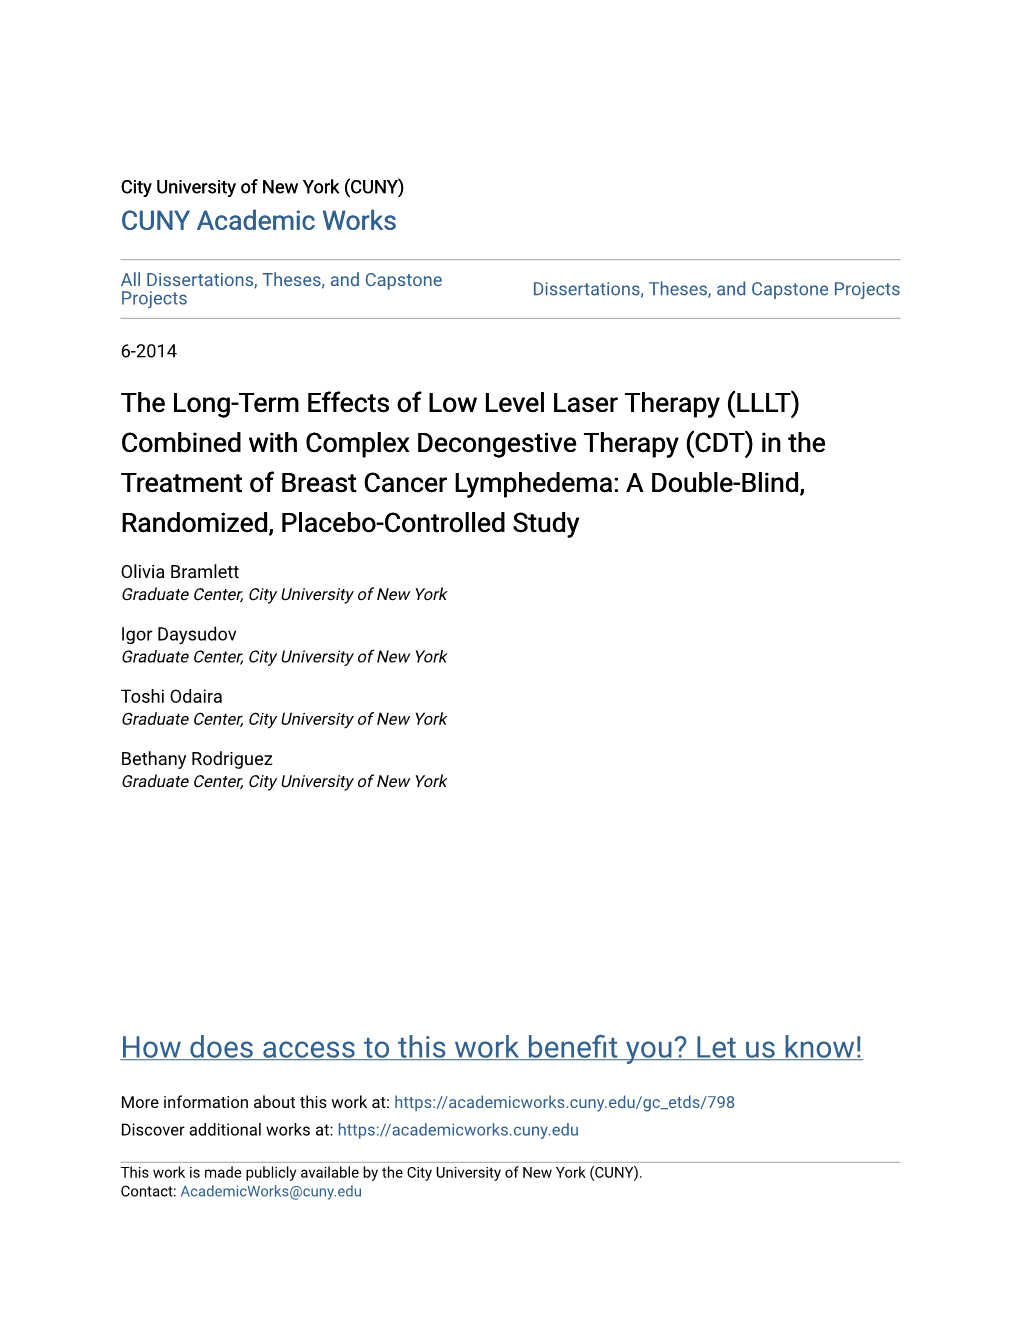 The Long-Term Effects of Low Level Laser Therapy (LLLT)